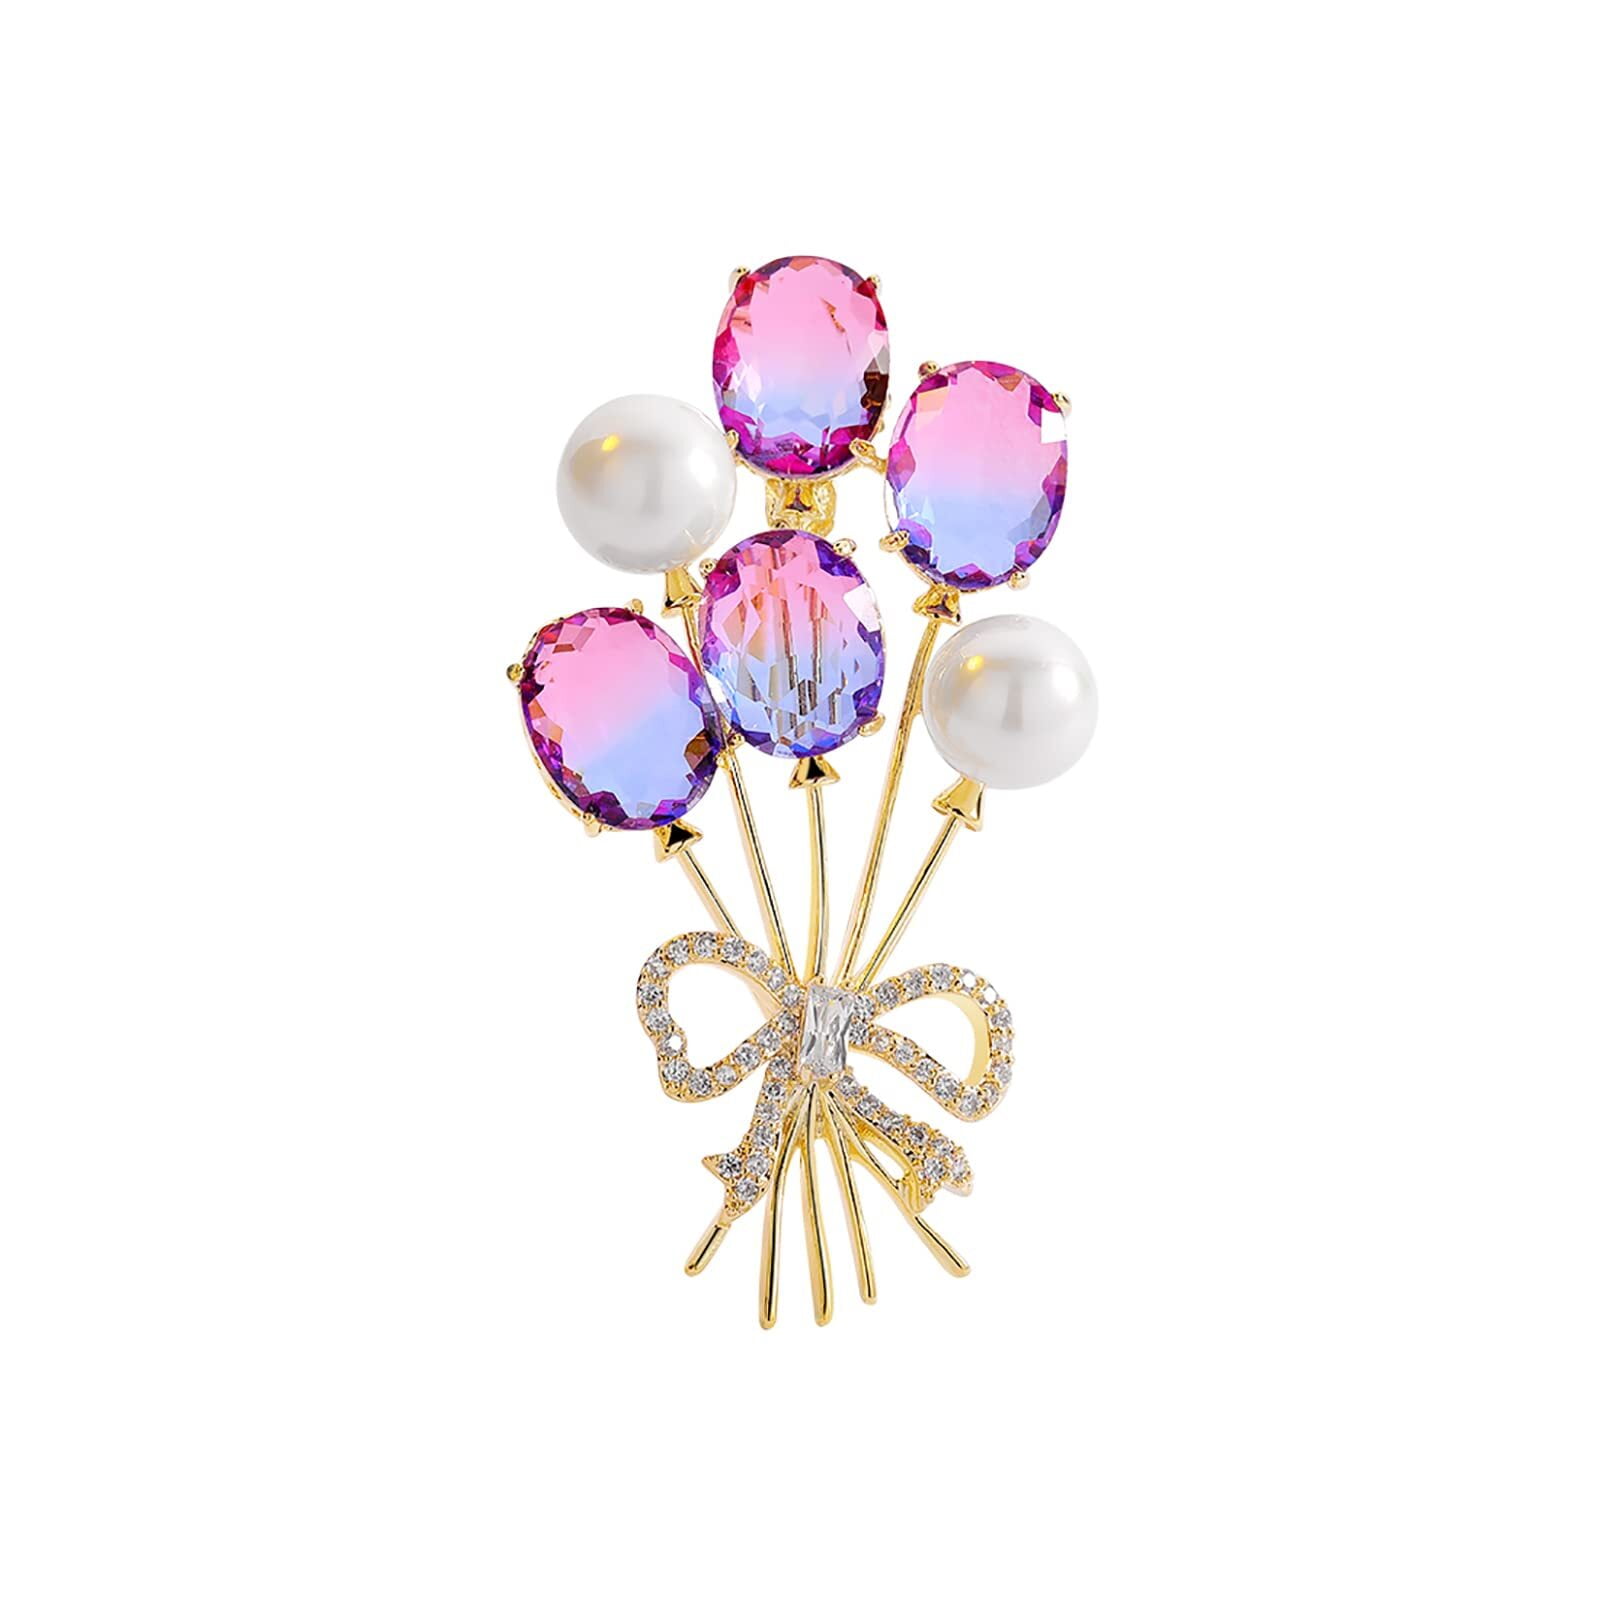 clberni Elegant Pearl Flower Designer Brooch Pins Broches Costume Jewelry for Women Fashion Christmas Gift, Women's, Size: 2.36 x 1.77, Gold